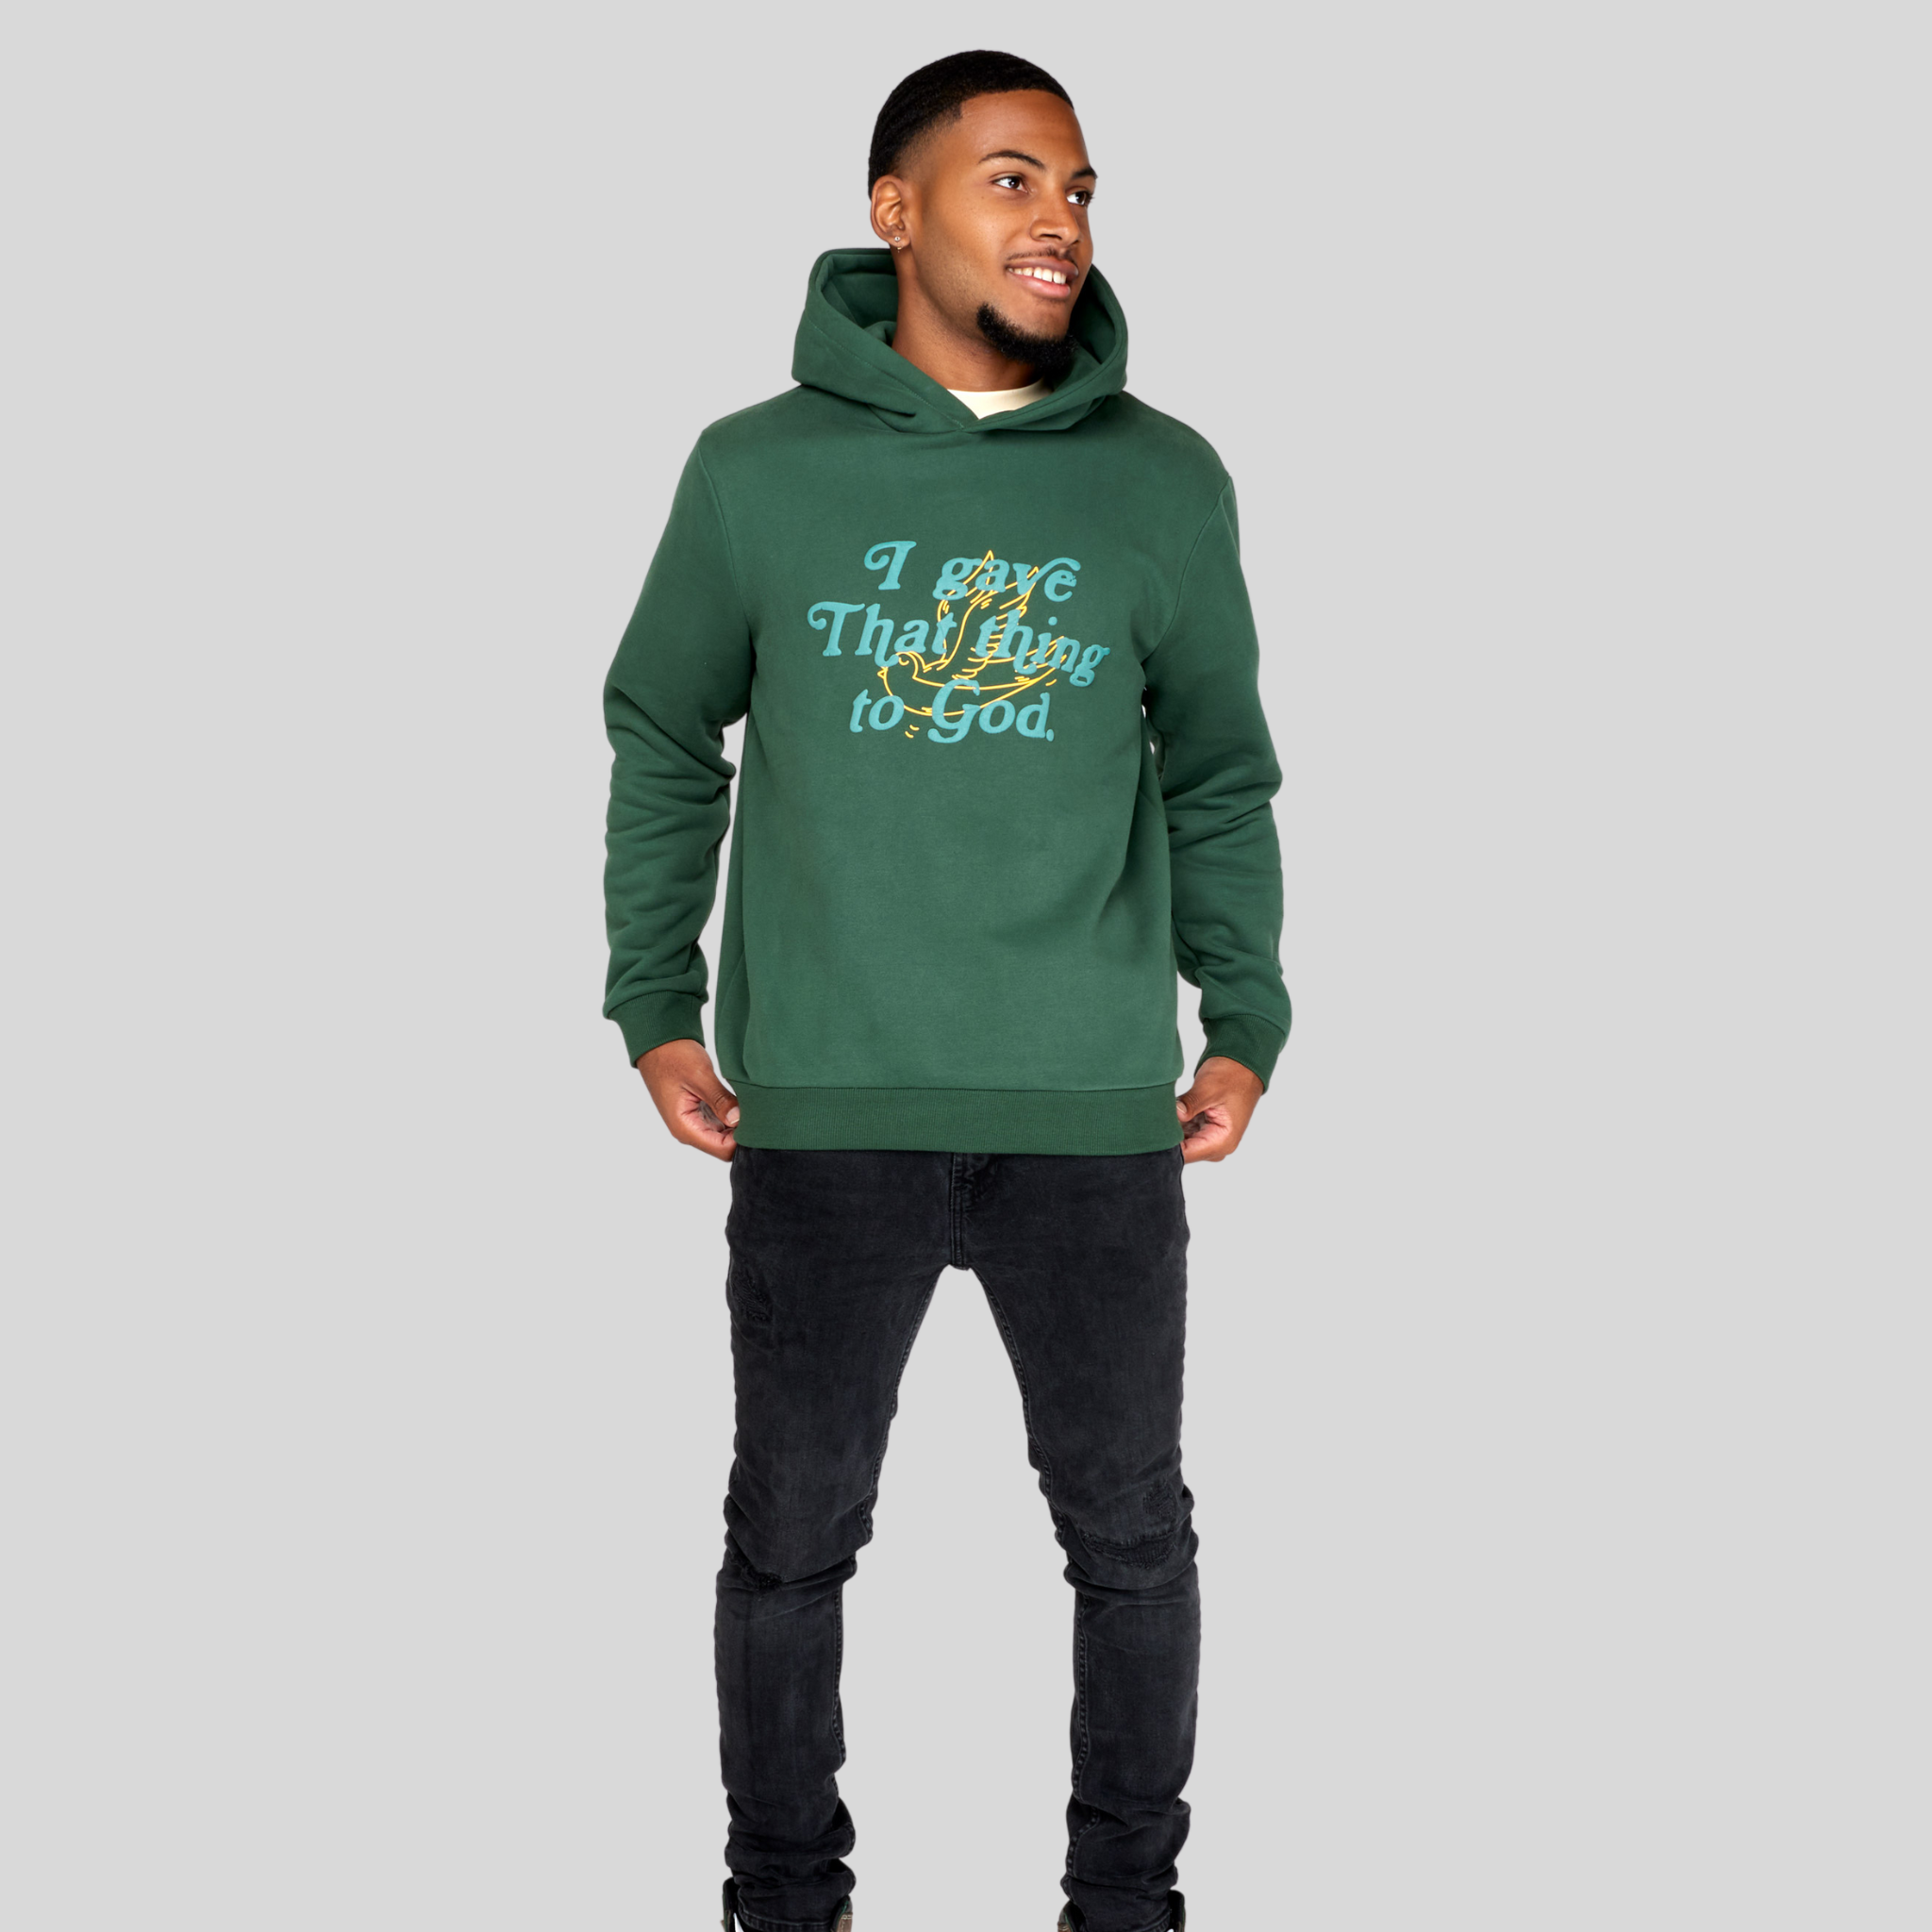 I Gave That Thing to God Hoodie